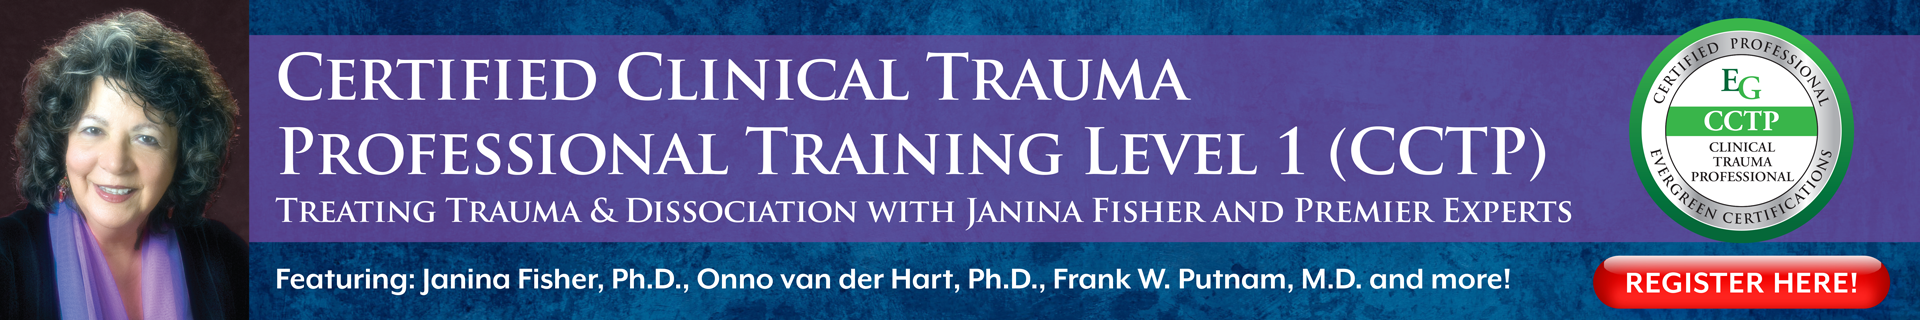 Certified Clinical Trauma Professional Training Level 1 (CCTP): Treating Trauma & Dissociation with Janina Fisher and Premier Experts